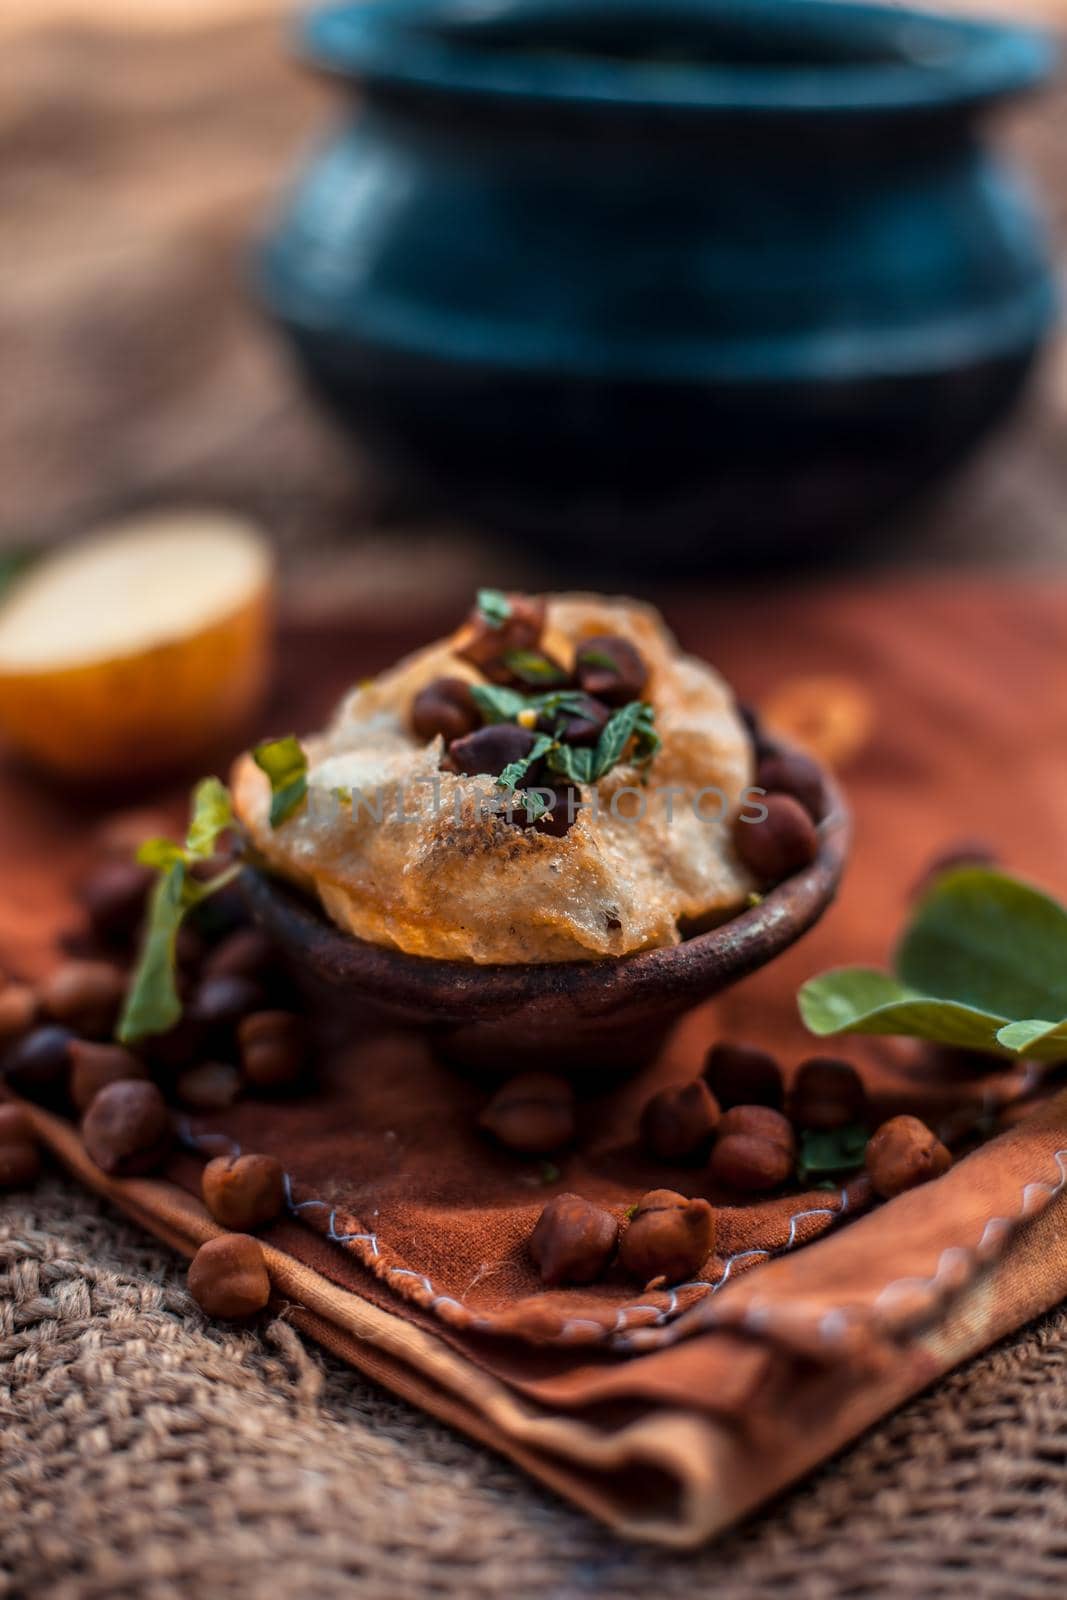 Famous Indian & Asian street food dish i.e. Golgappa snack in a clay bowl along with its flavored spicy water in another clay vessel. Vertical shot of the snack and its ingredients present.